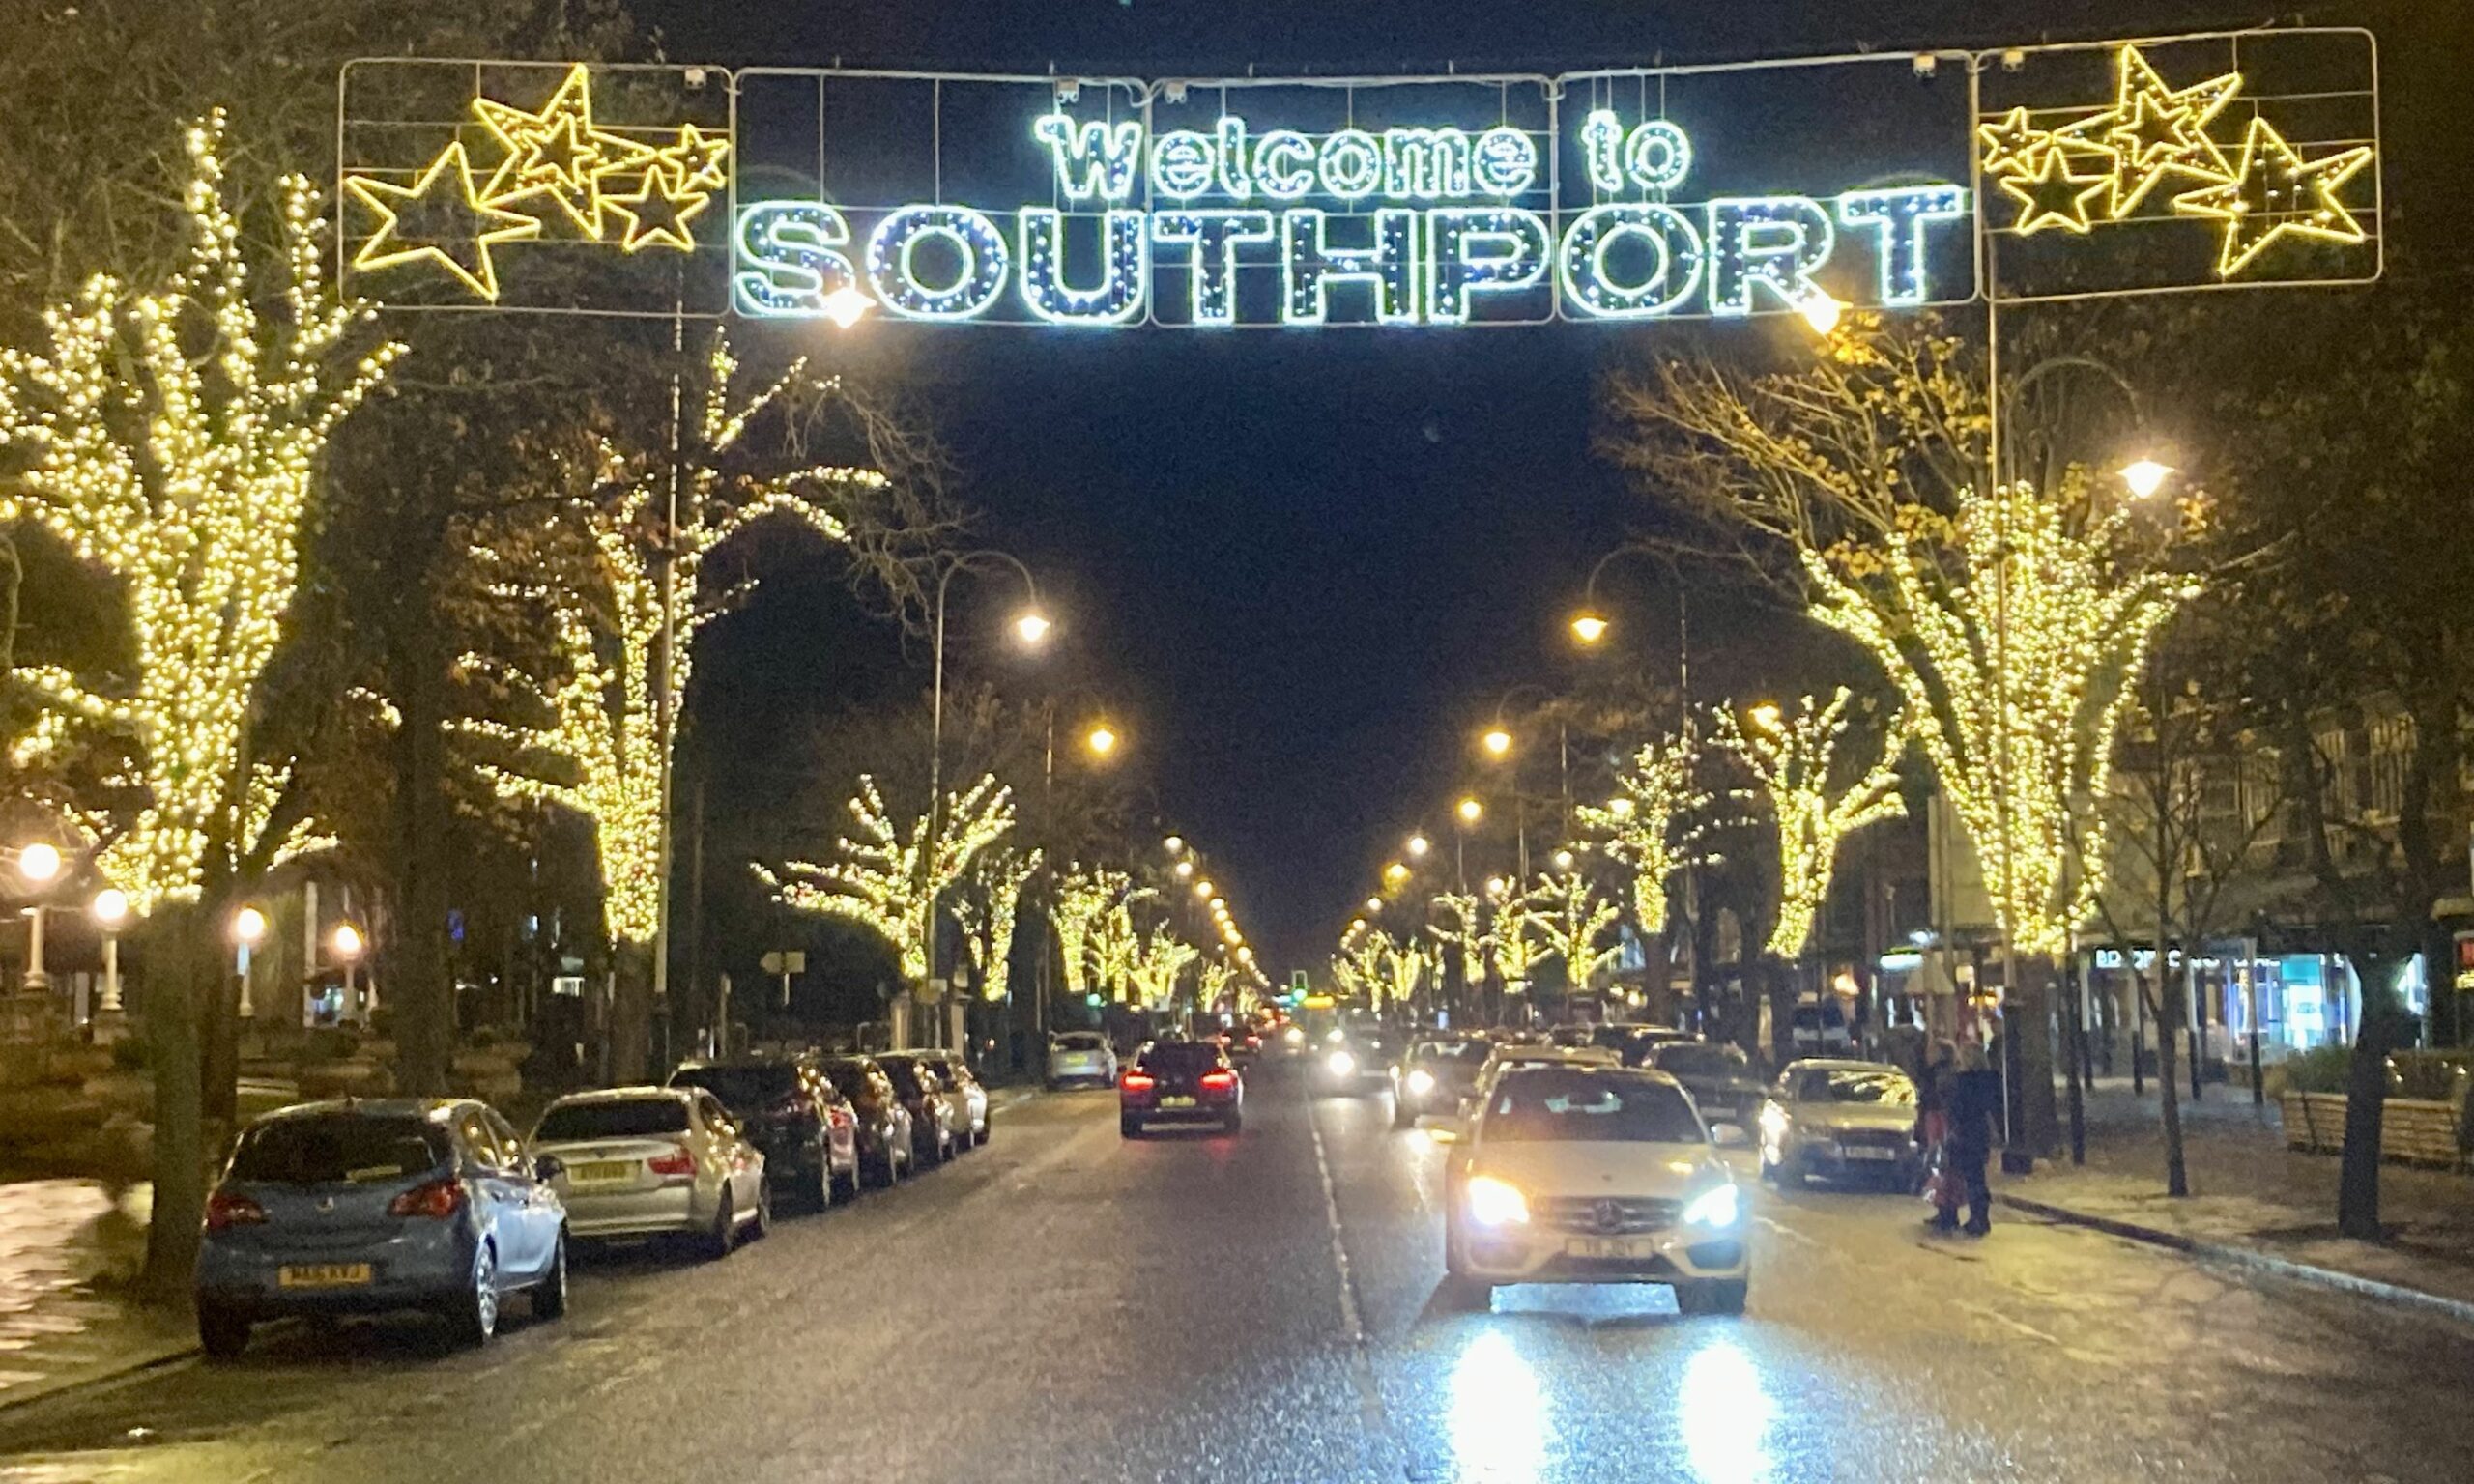 The lights on Lord Street in Southport provided by Southport BID. Photo by Andrew Brown Media